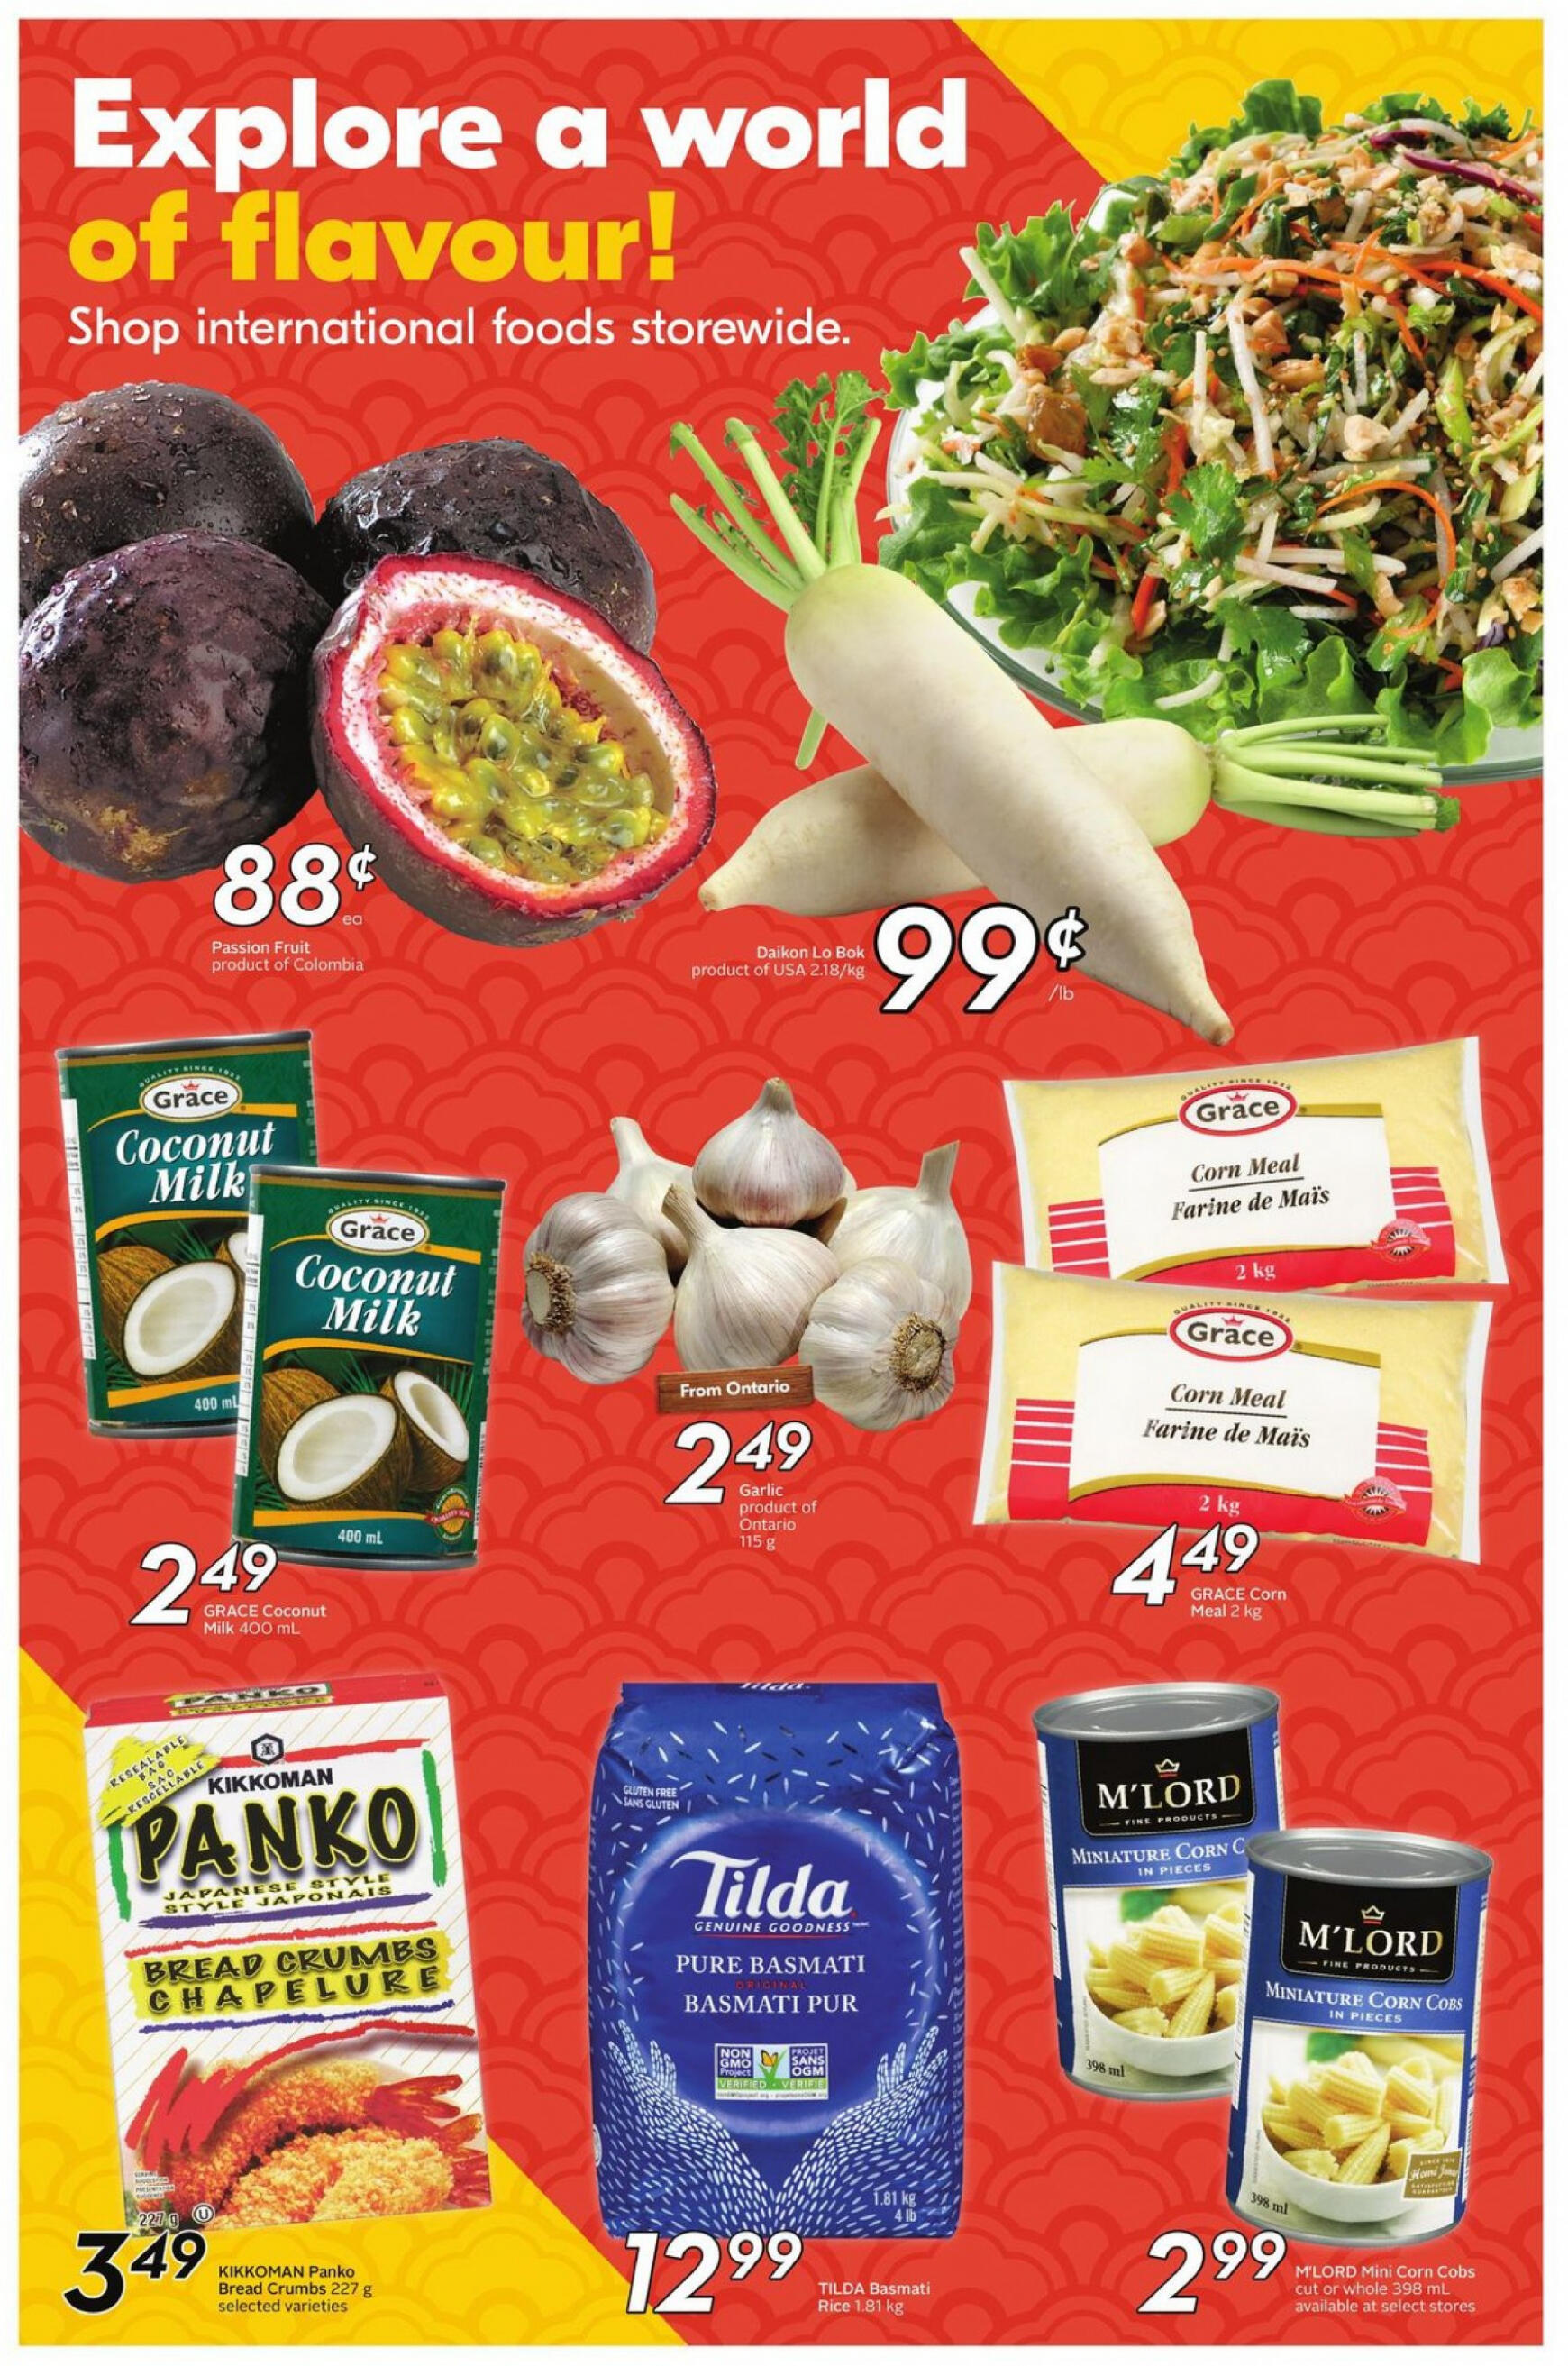 sobeys - Sobeys - Weekly Flyer - Ontario flyer current 09.05. - 15.05. - page: 15